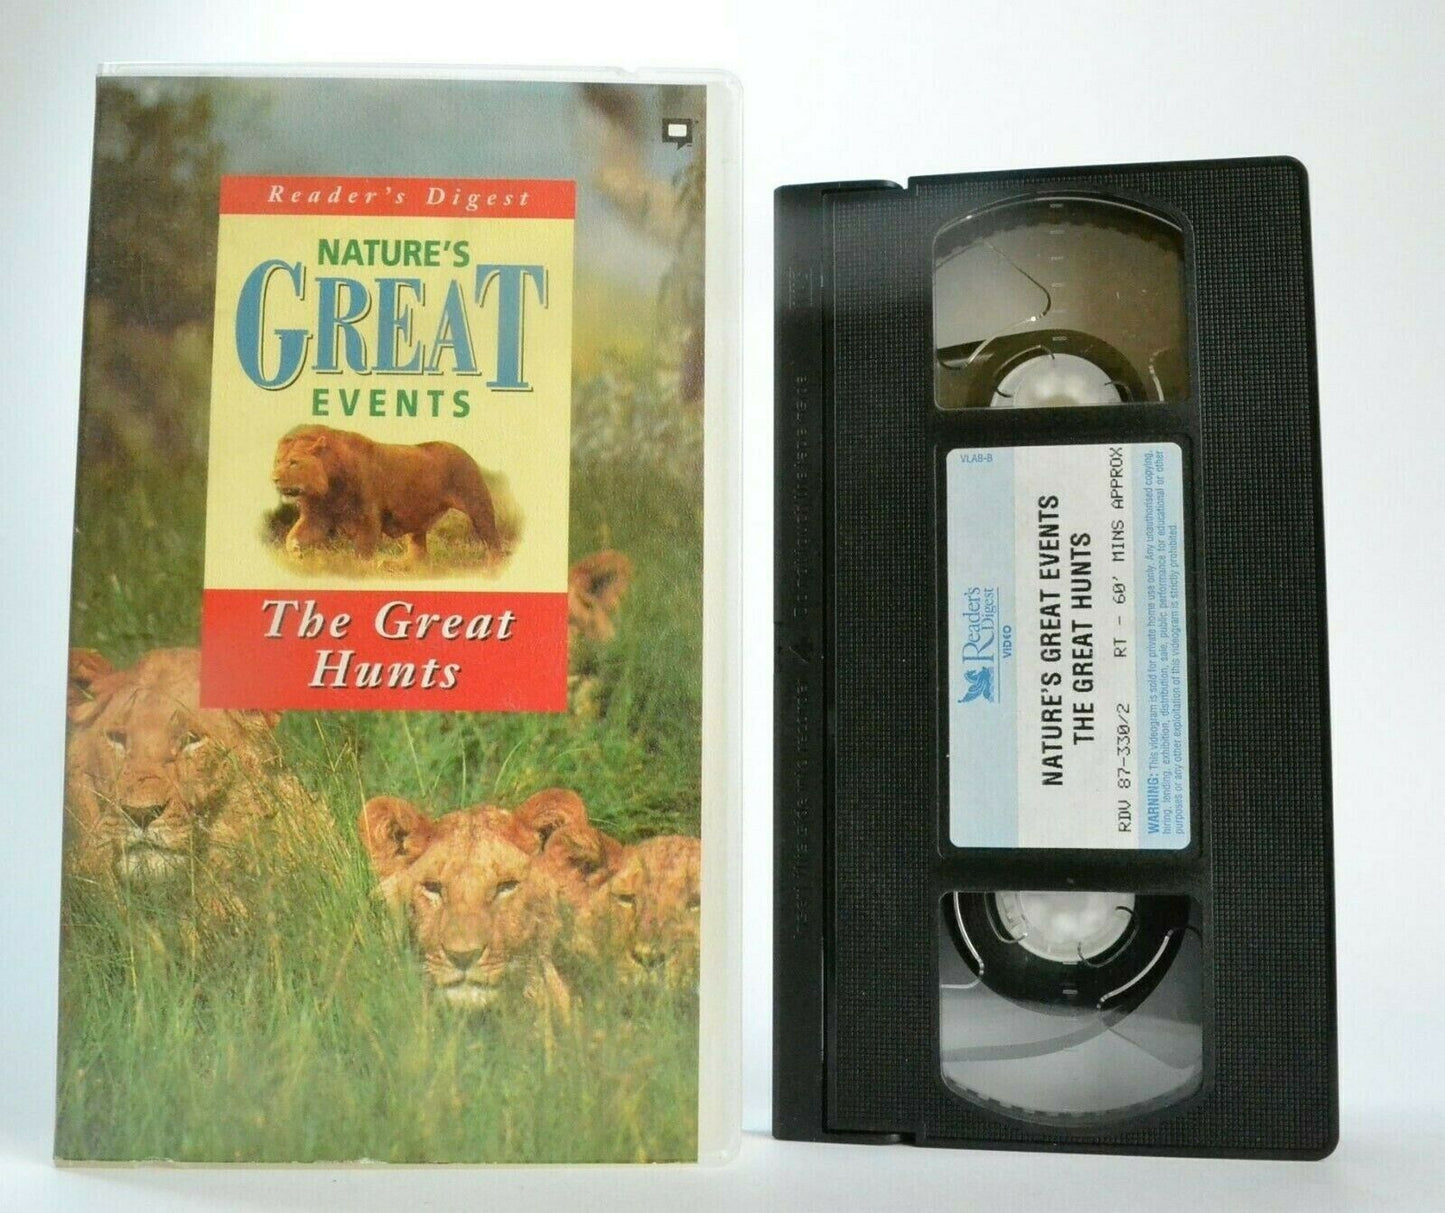 Nature's Great Events: The Great Hunts [Reader's Digest] - Amazon Forest - VHS-